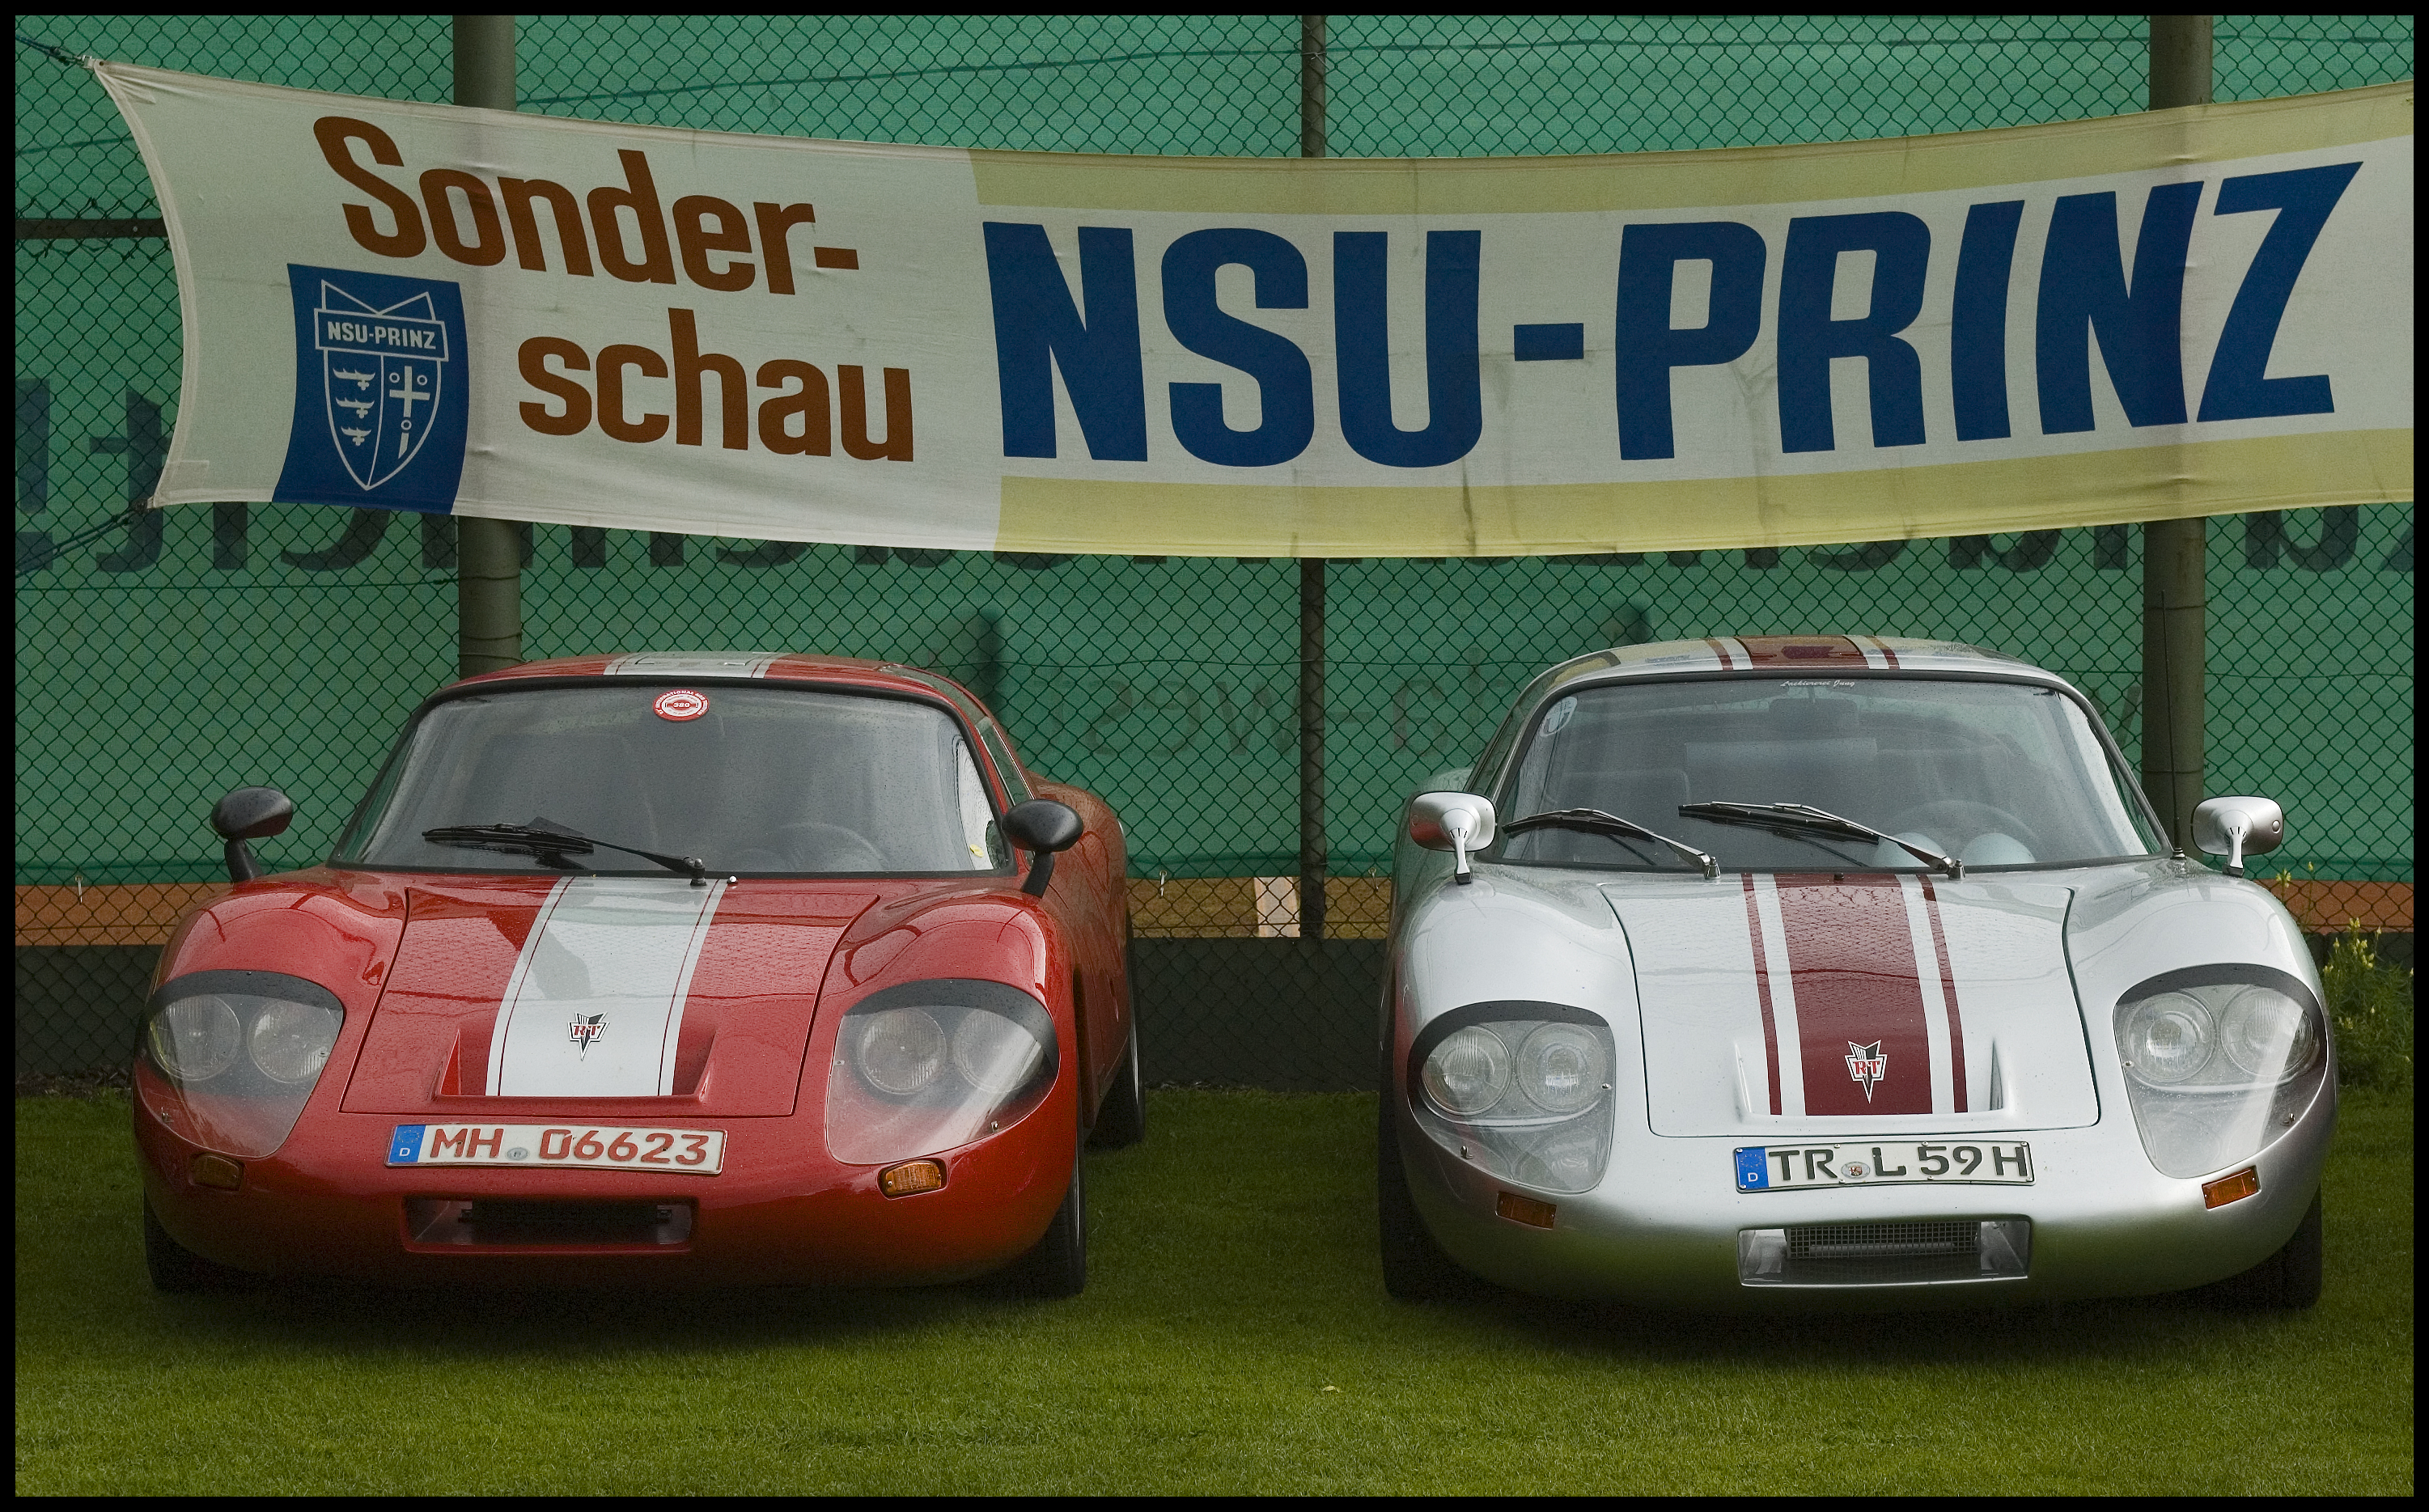 Two (NSU) RT cars, also known as Thurner RS